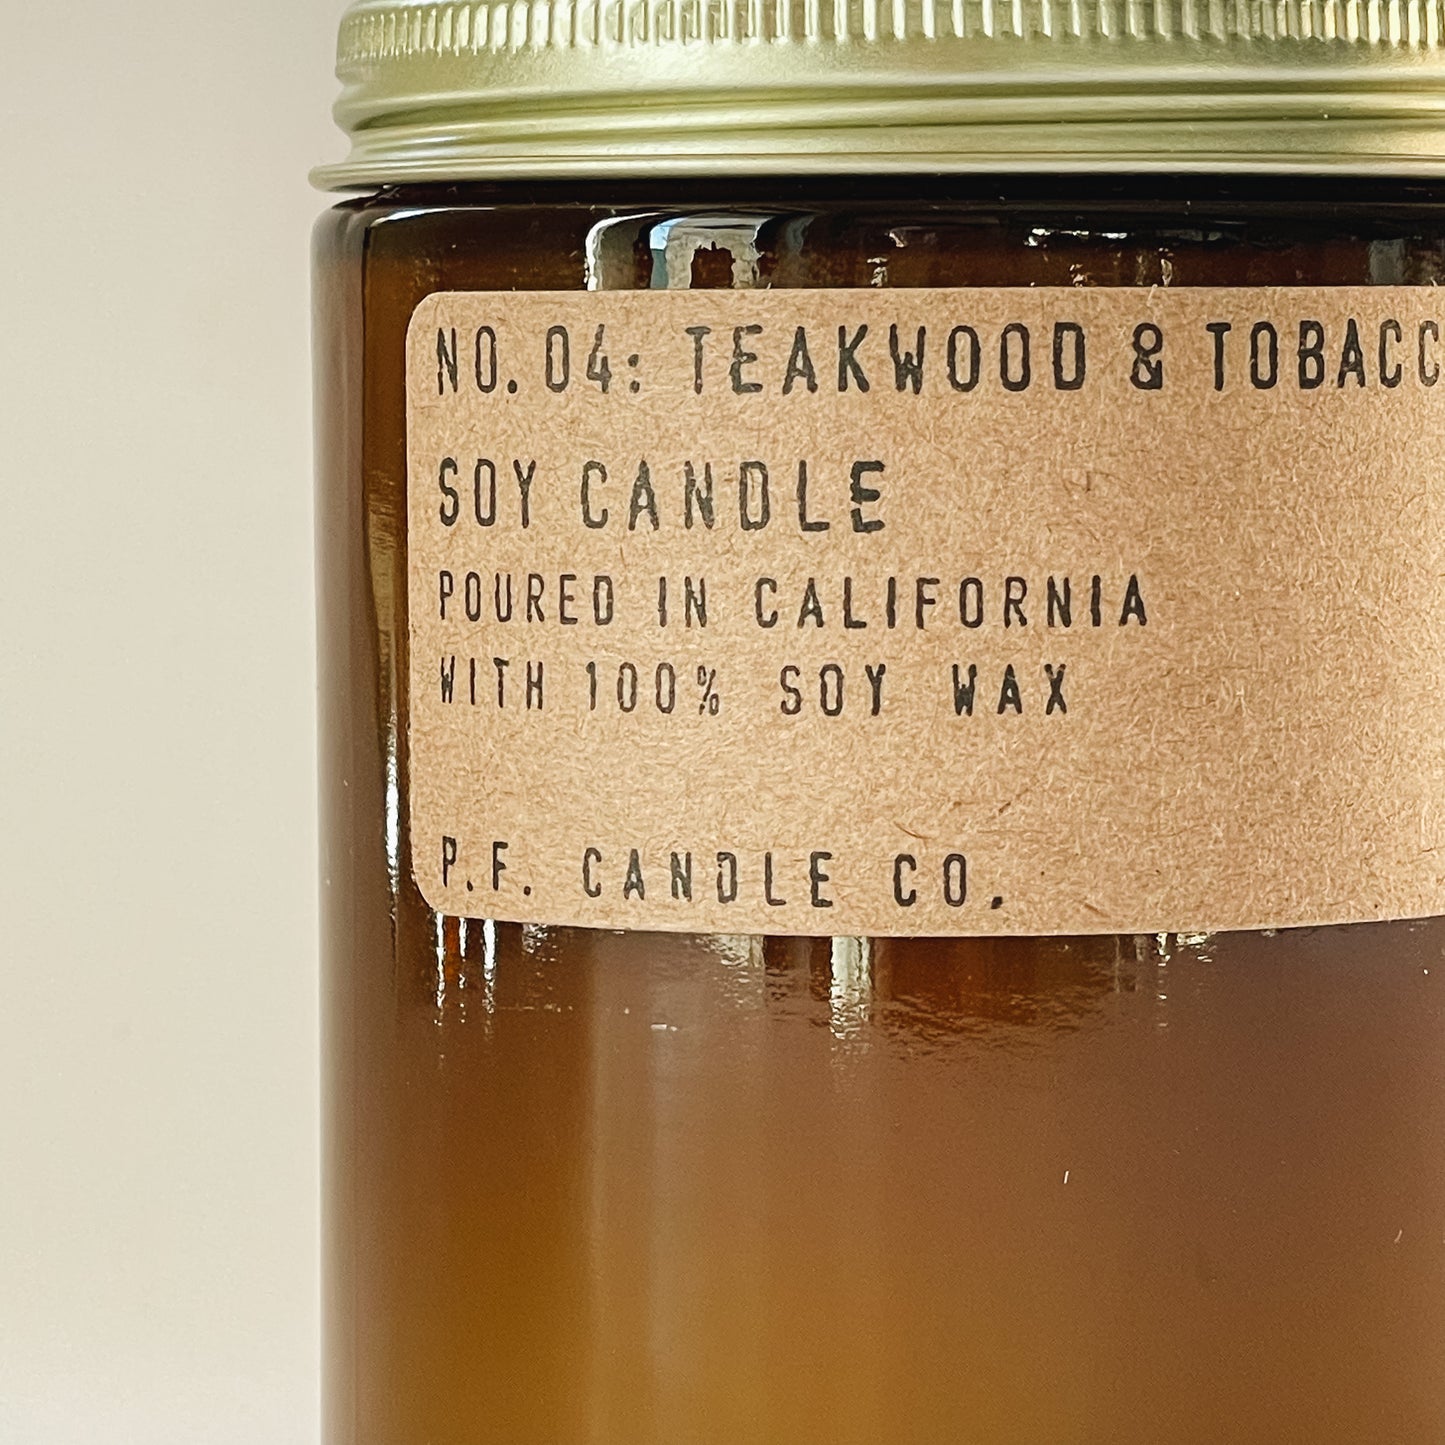 P.F. Candle Co. Soy Candle | Teakwood & Tobacco